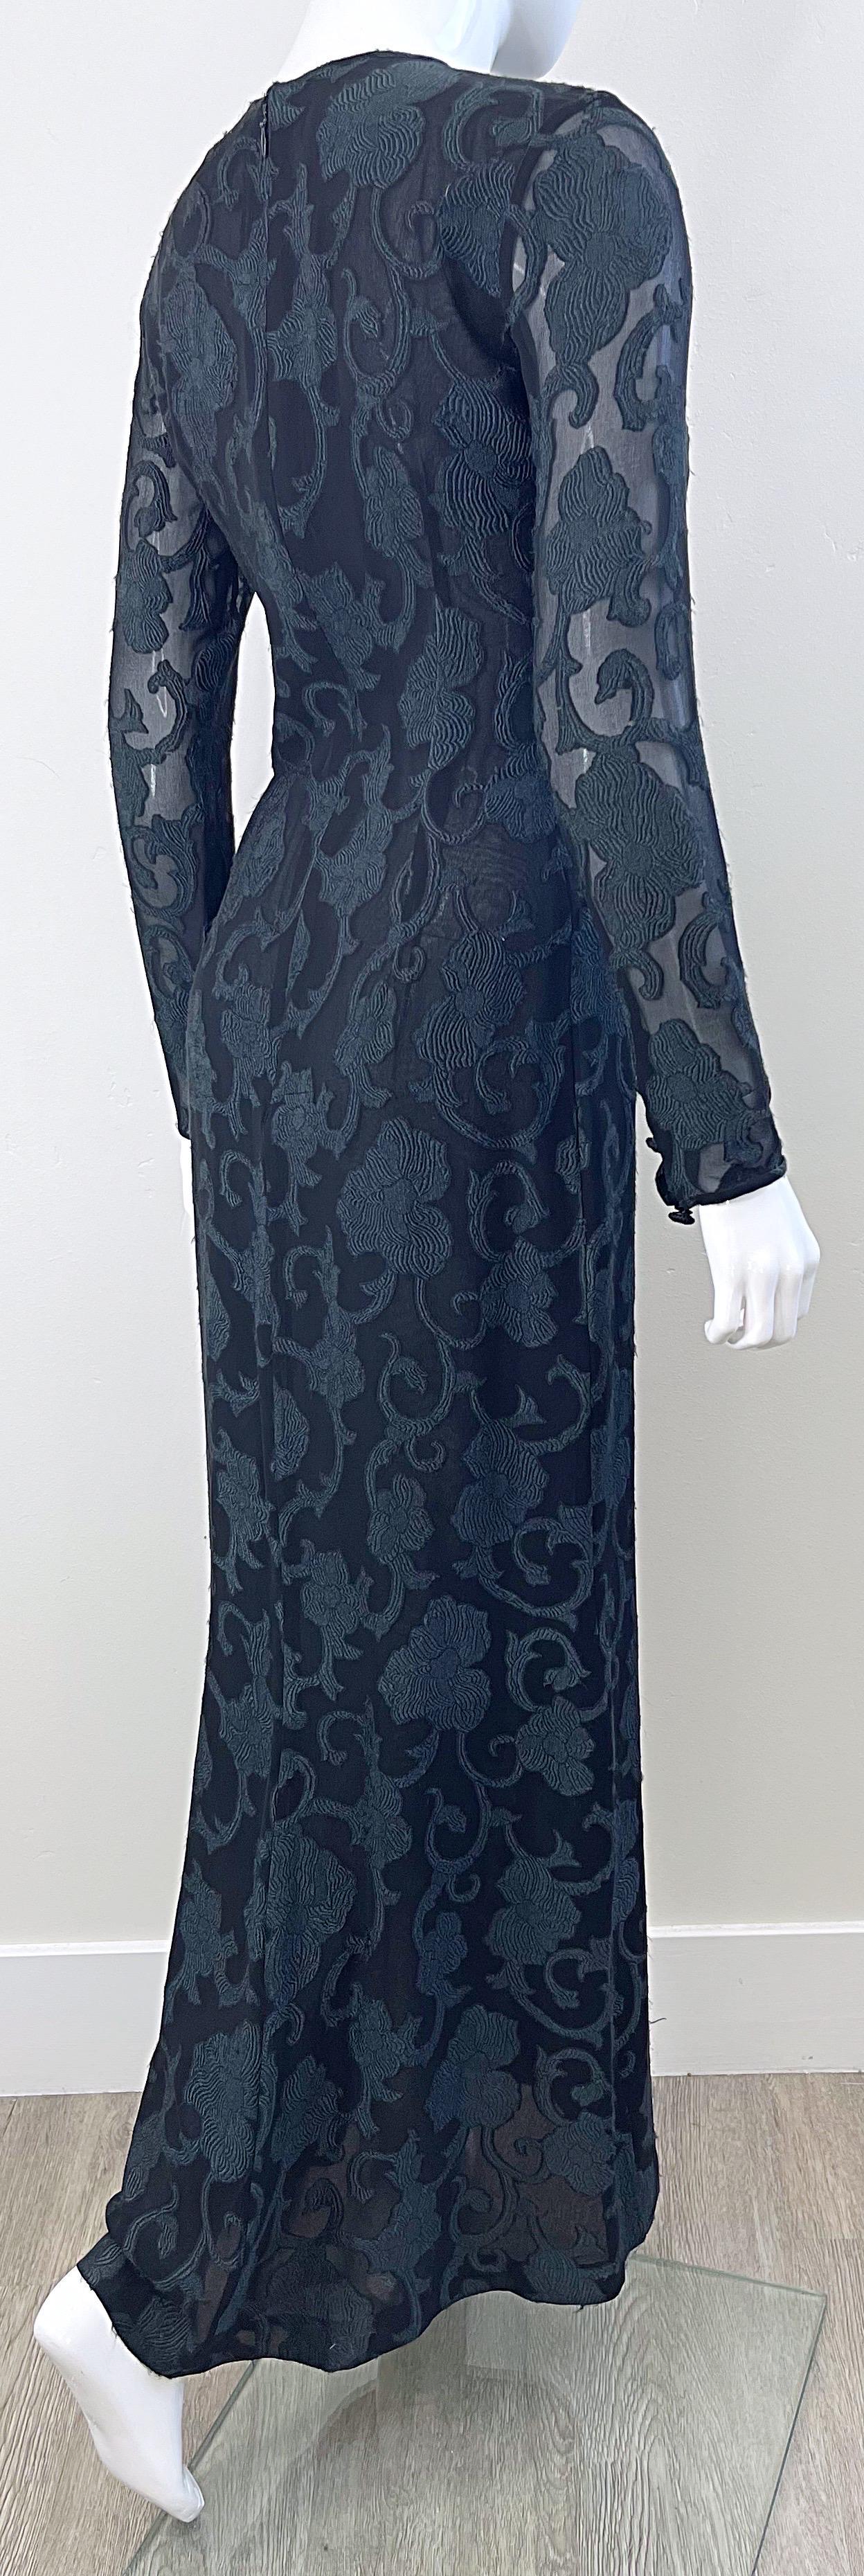 1990s James Purcell Couture Black Silk Chiffon Semi Sheer Filigree Print Gown  For Sale 7